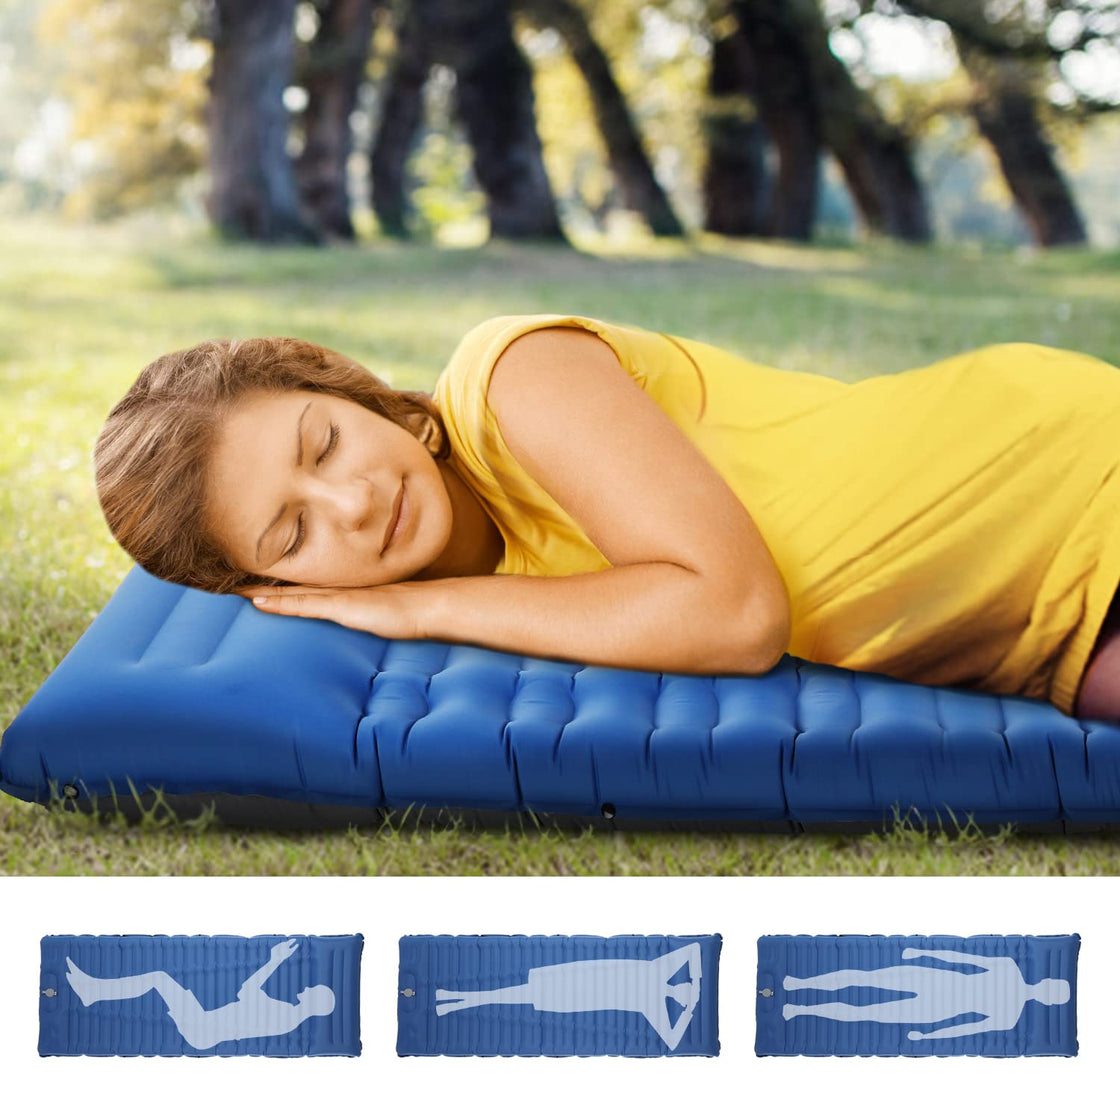 Brace Master Camping Sleeping Pad with Pillow